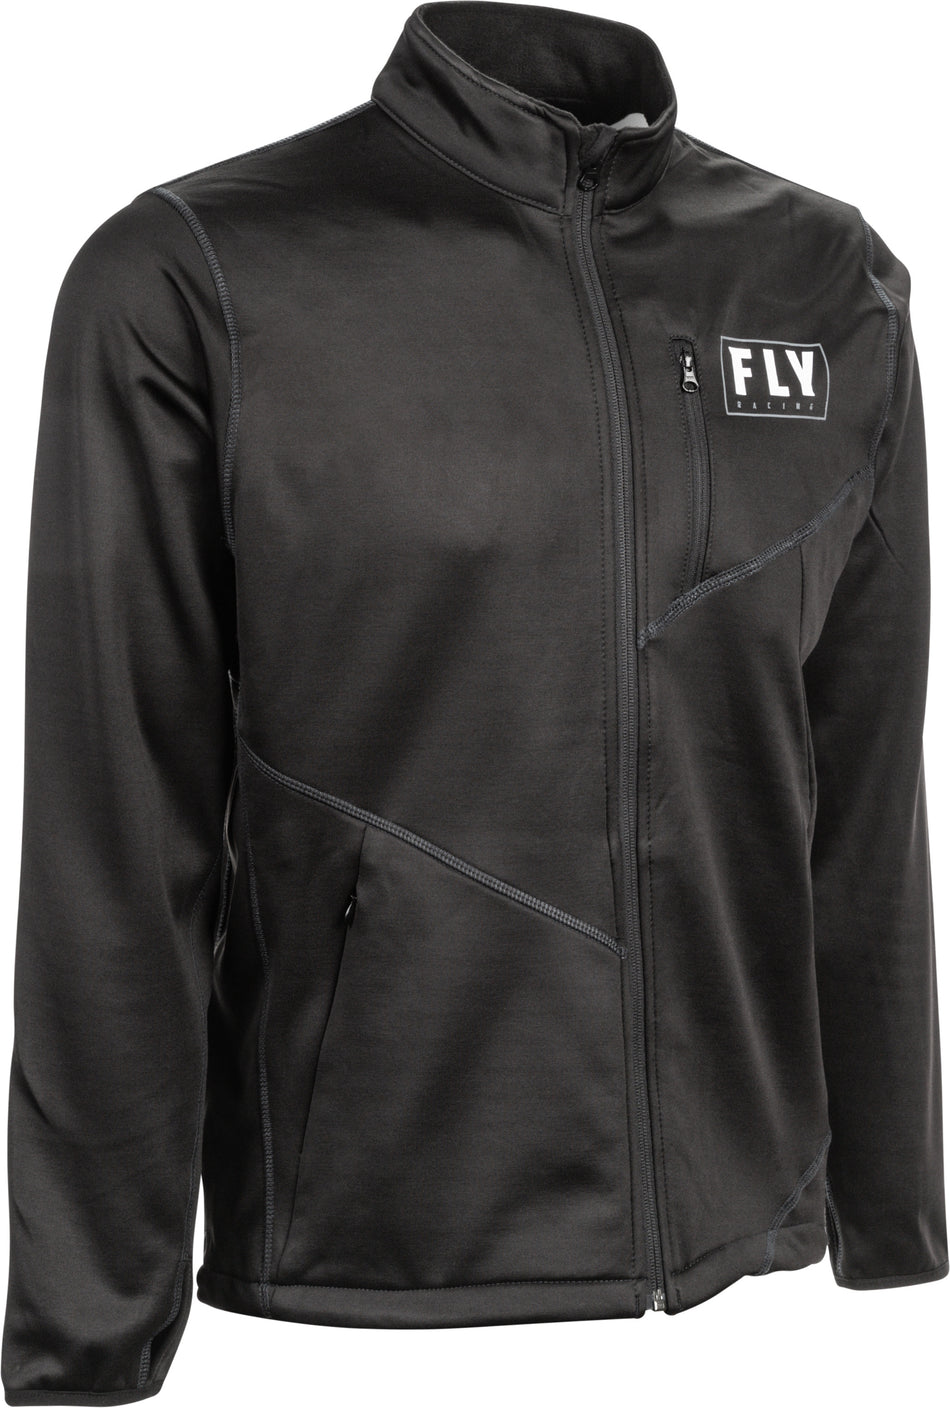 FLY RACING Mid-Layer Jacket Black Md 354-6320M